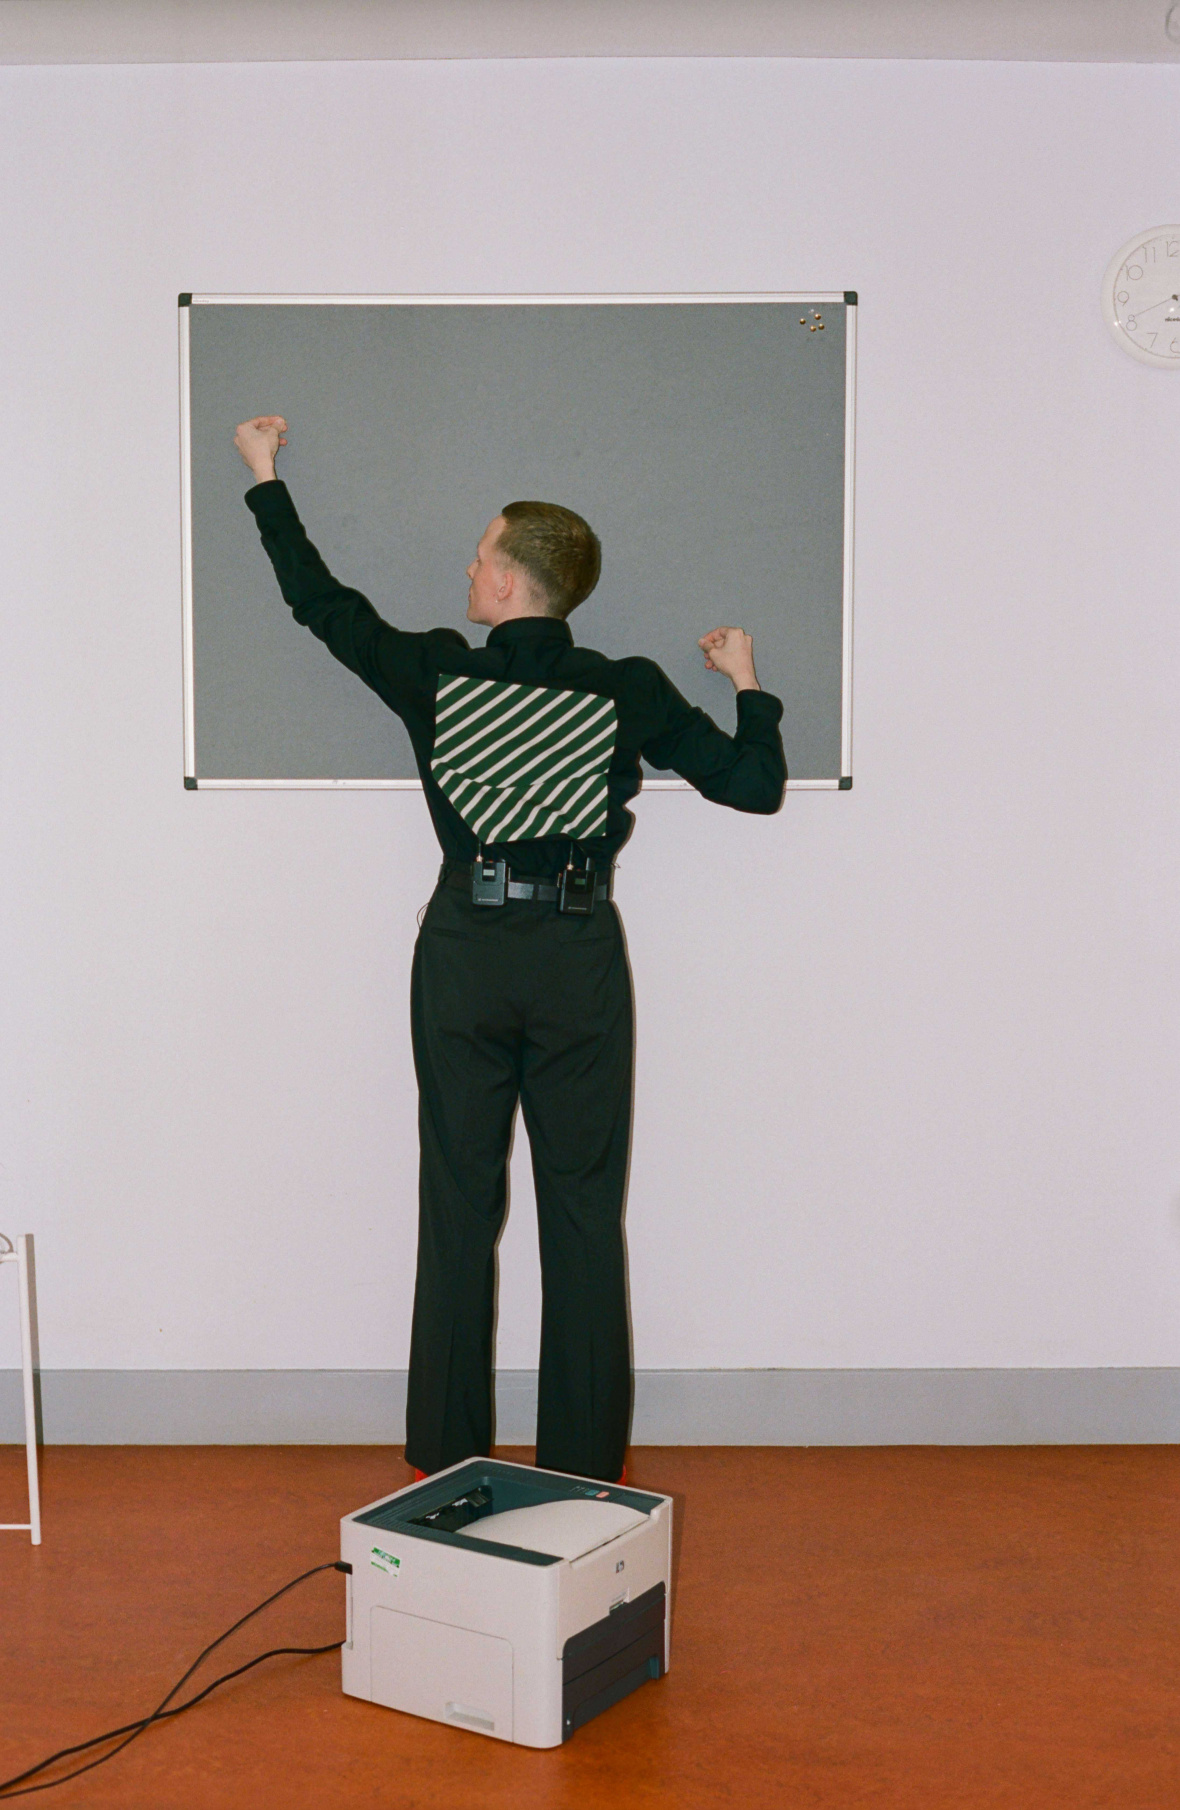 Shirt by RAF SIMONS, Trousers by PAUL SMITH, Belt — Stylist’s own, Boots by CAMPER LAB